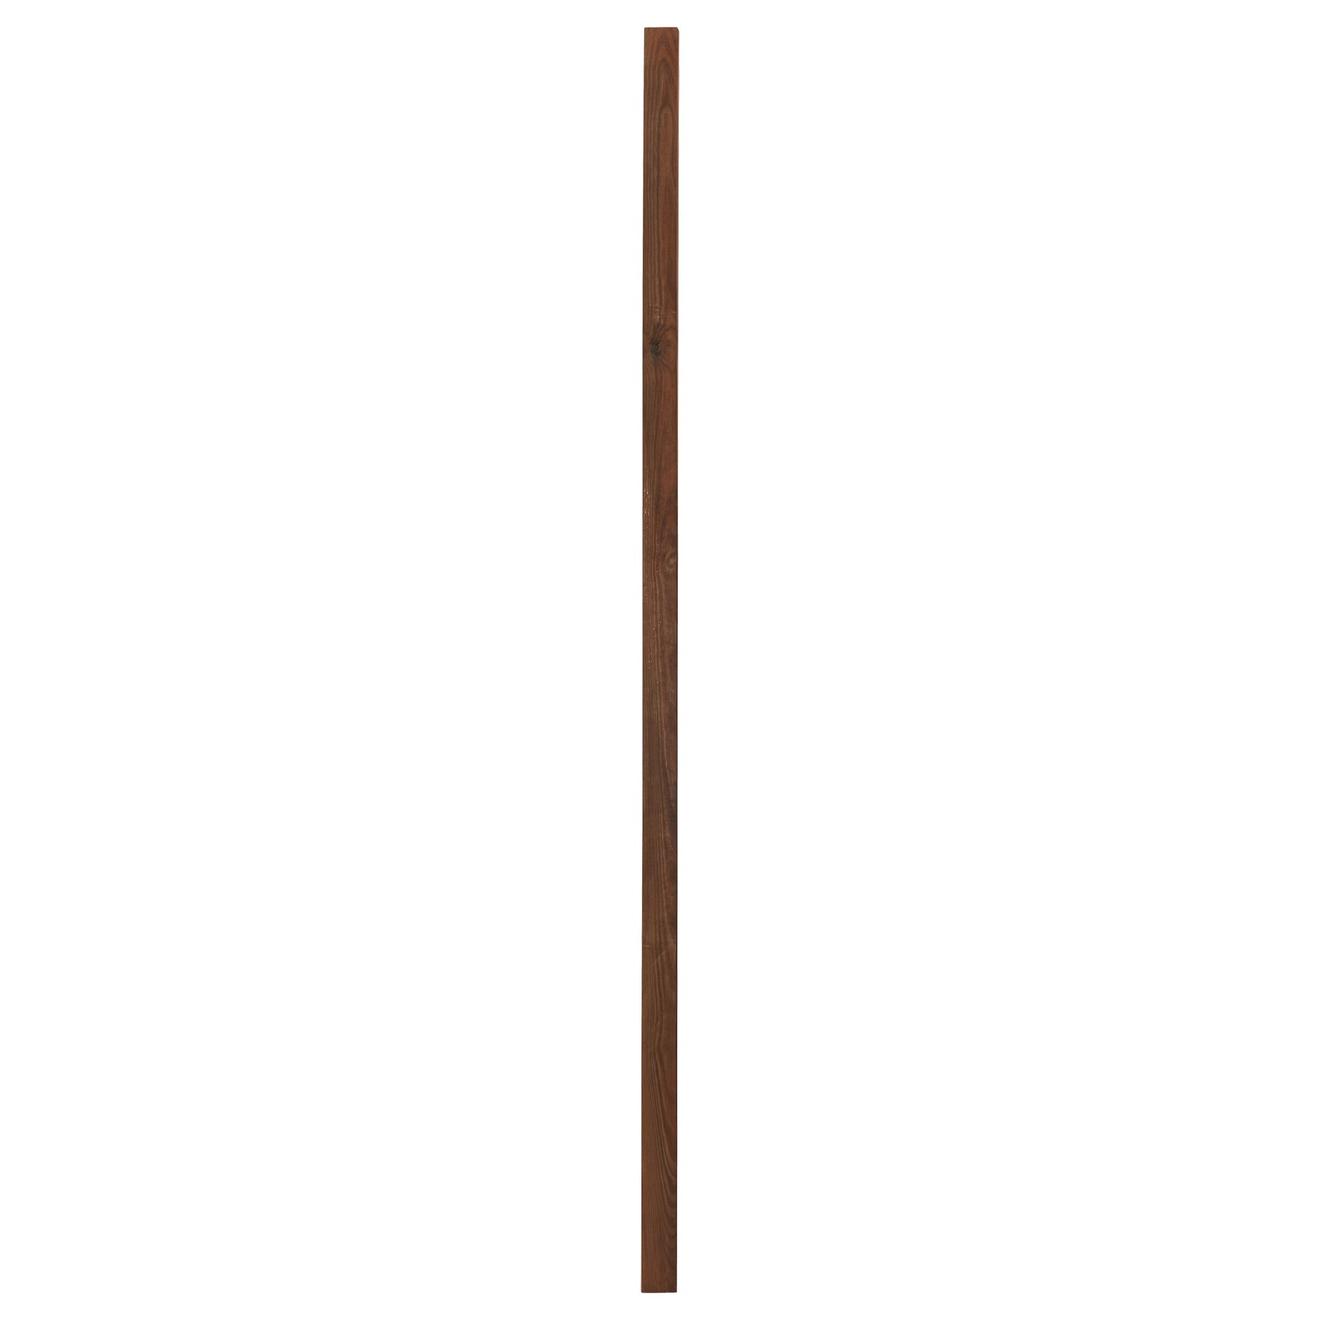 Klikstrom UC4 Brown Square Wooden Fence post (H)2.4m (W)70mm offers at £17 in B&Q